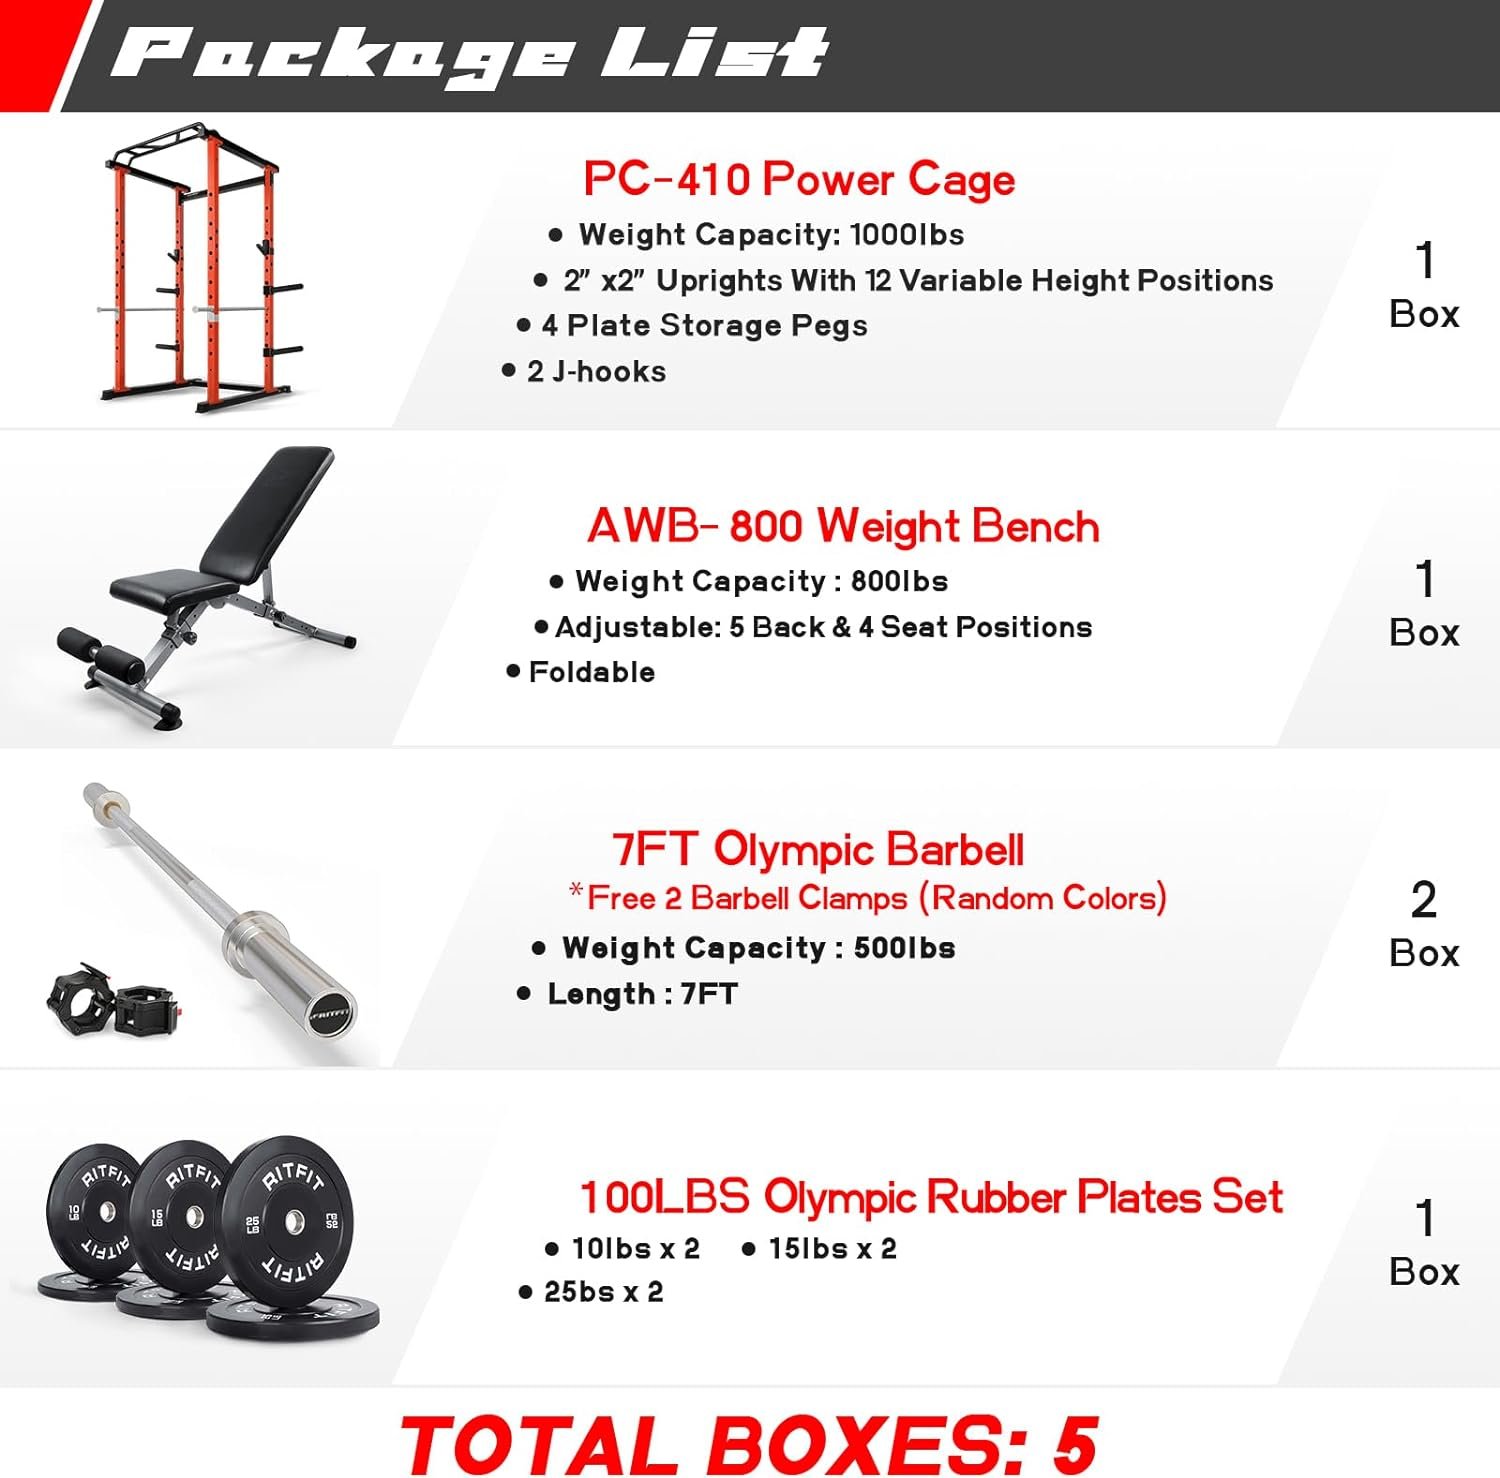 RitFit PC-410 Power Cage 1000LB Capacity and Packages with Optional Basic Power Rack, Weight Bench, Barbell Set with Olympic Barbell, DIY LAT Pull Down Pulley System, for Garage  Home Gym